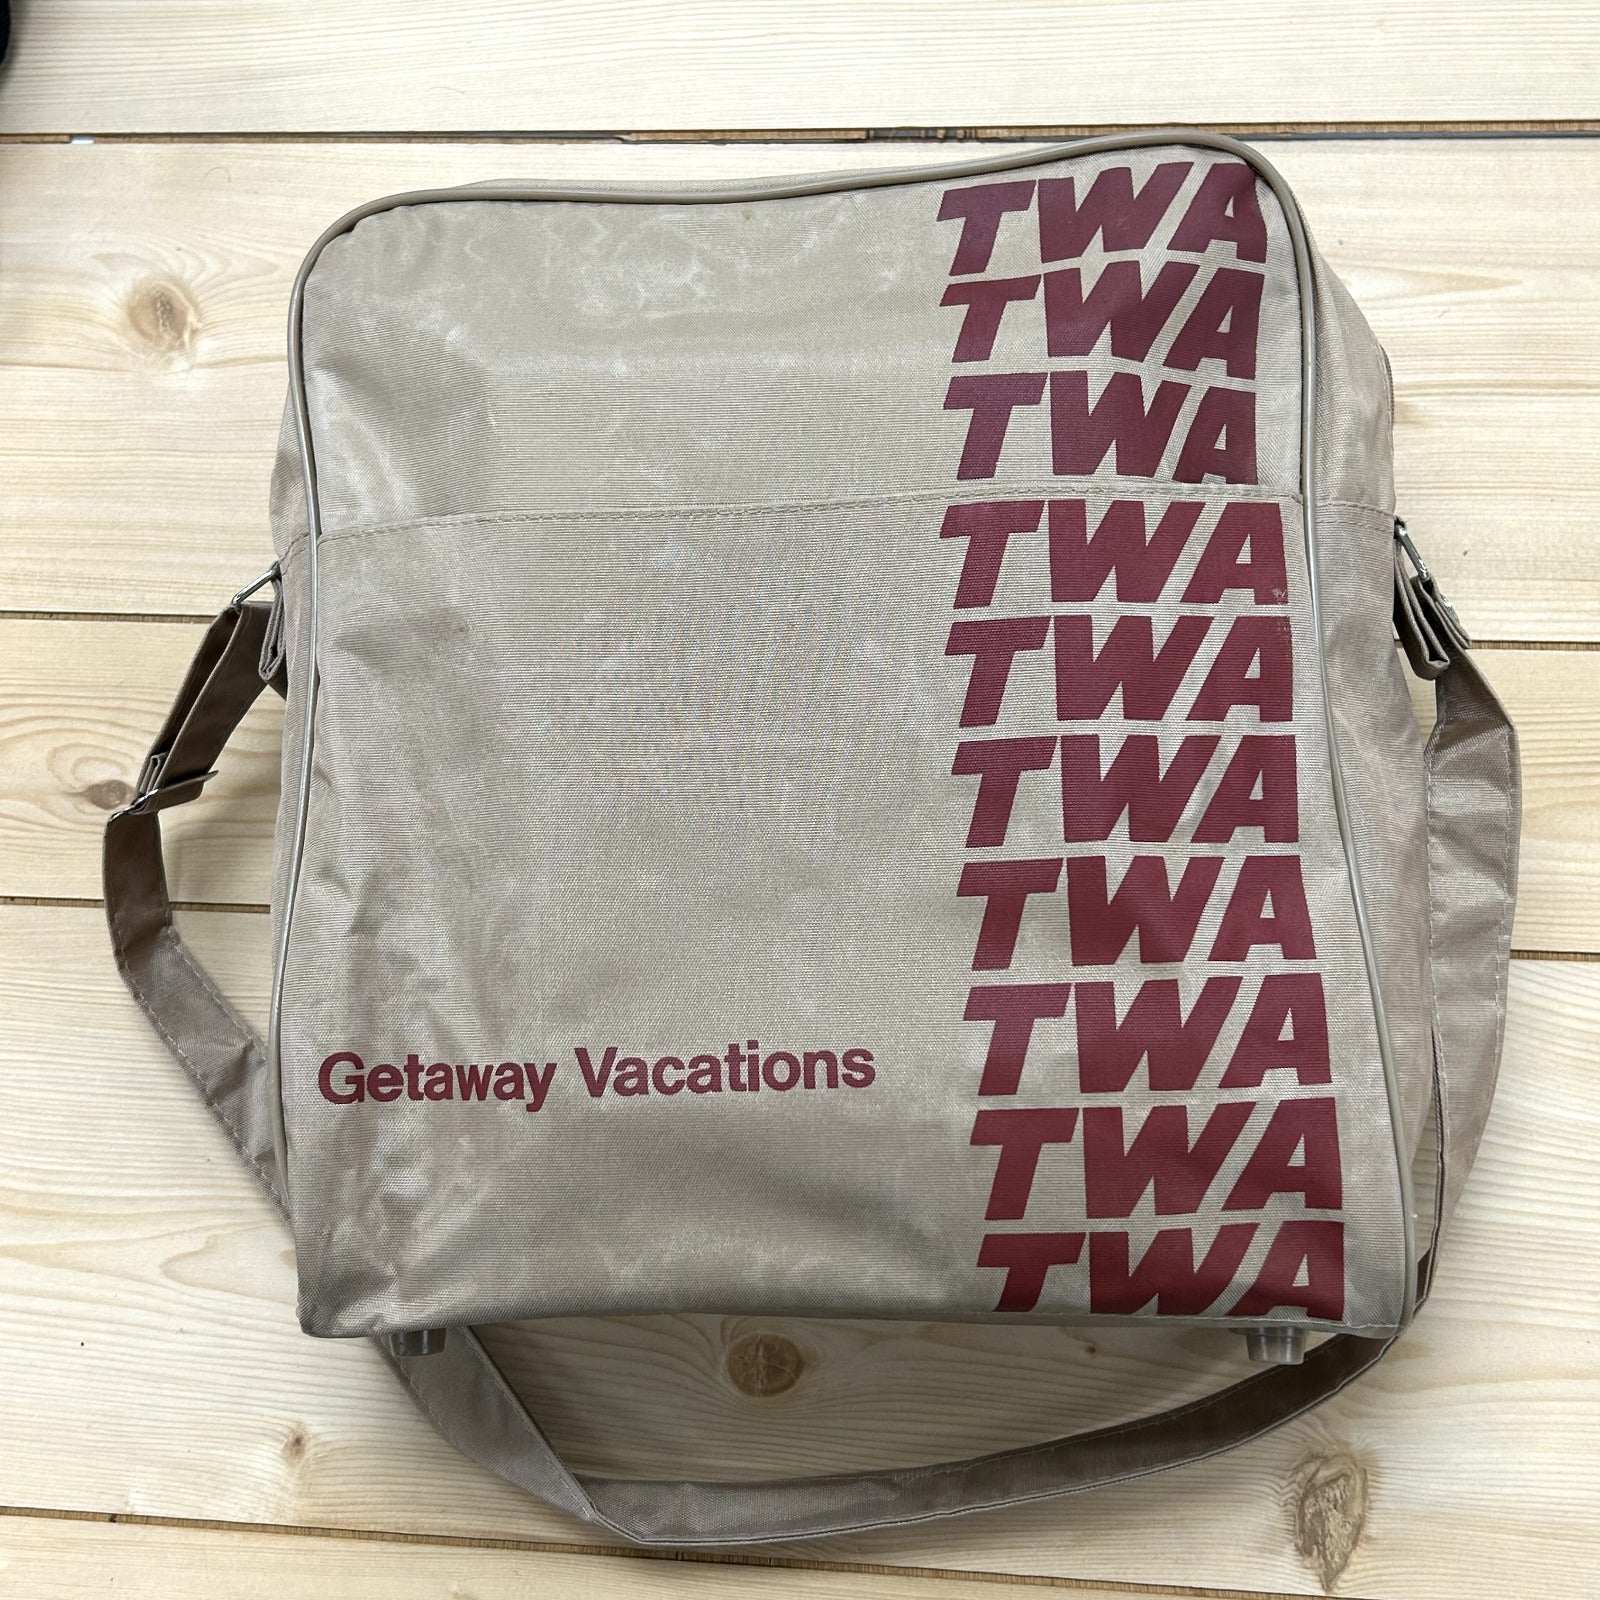 Vintage TWA Trans World Airlines Getaway Vacations Carry on Travel Bag Tote 70's